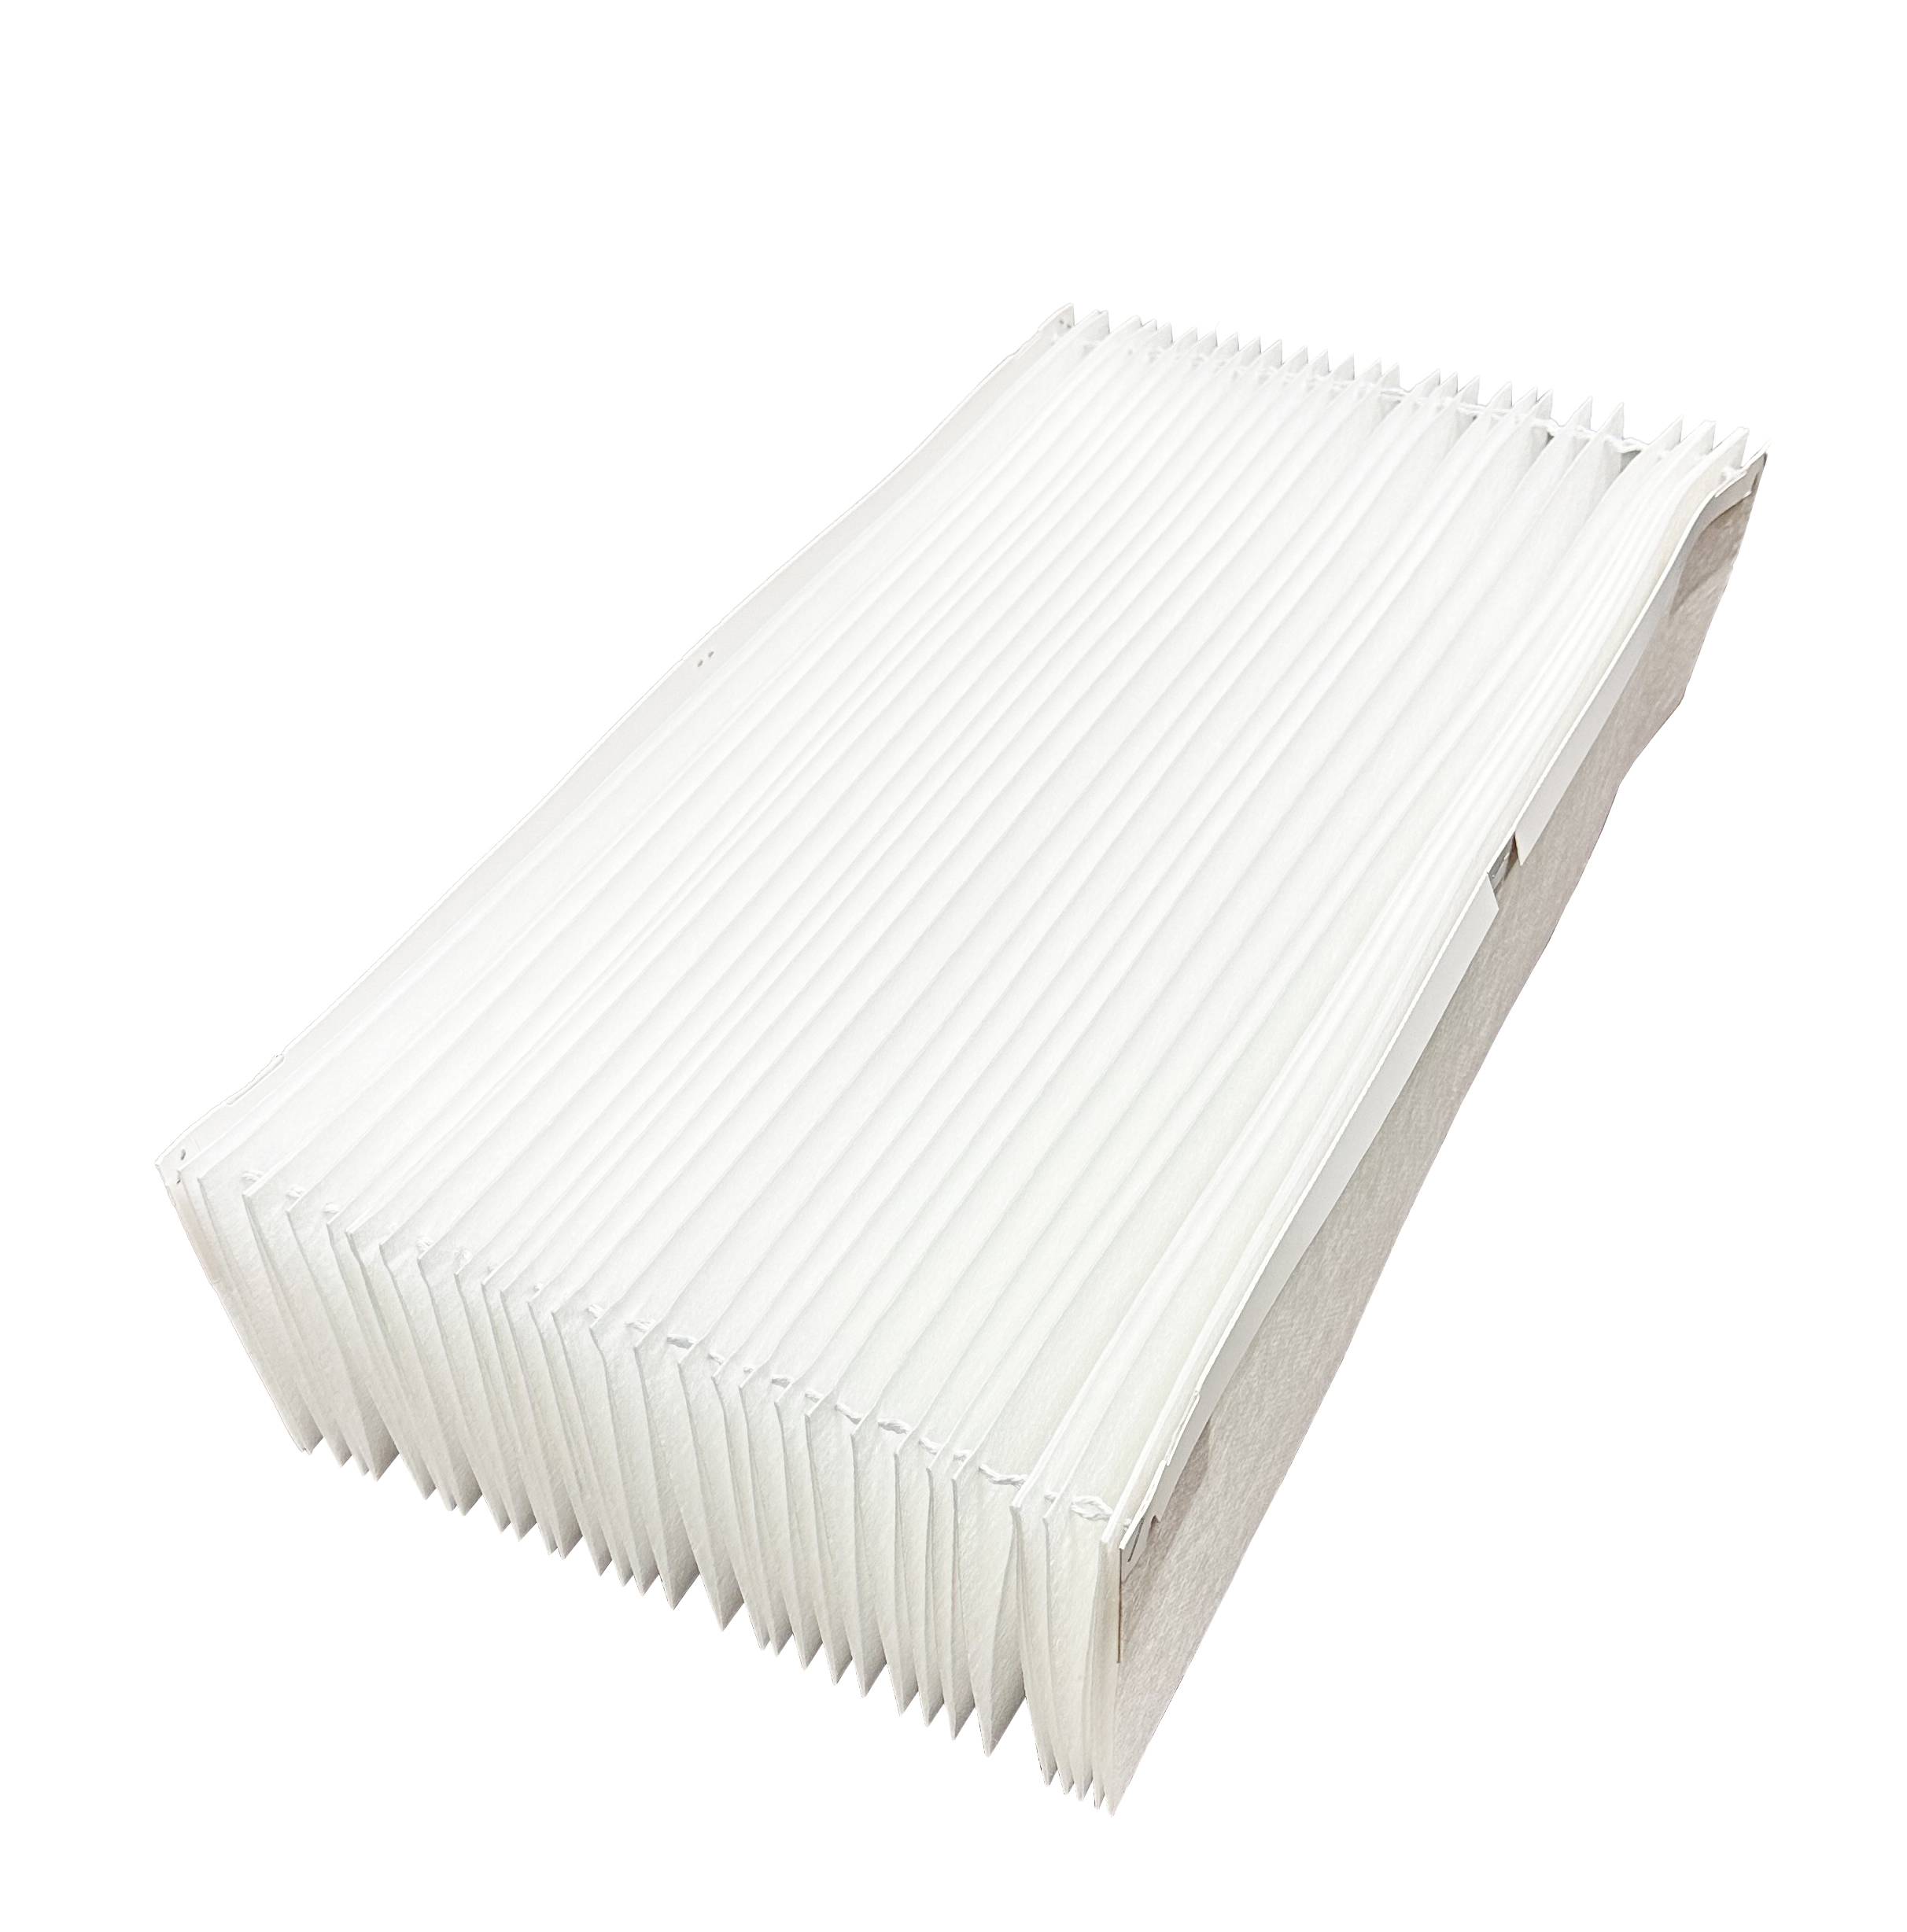 X5425 Filters Fast® Replacement for Lennox X5425 PMAC-20C 17x28x6 MERV 16 Furnace & AC Air Filter